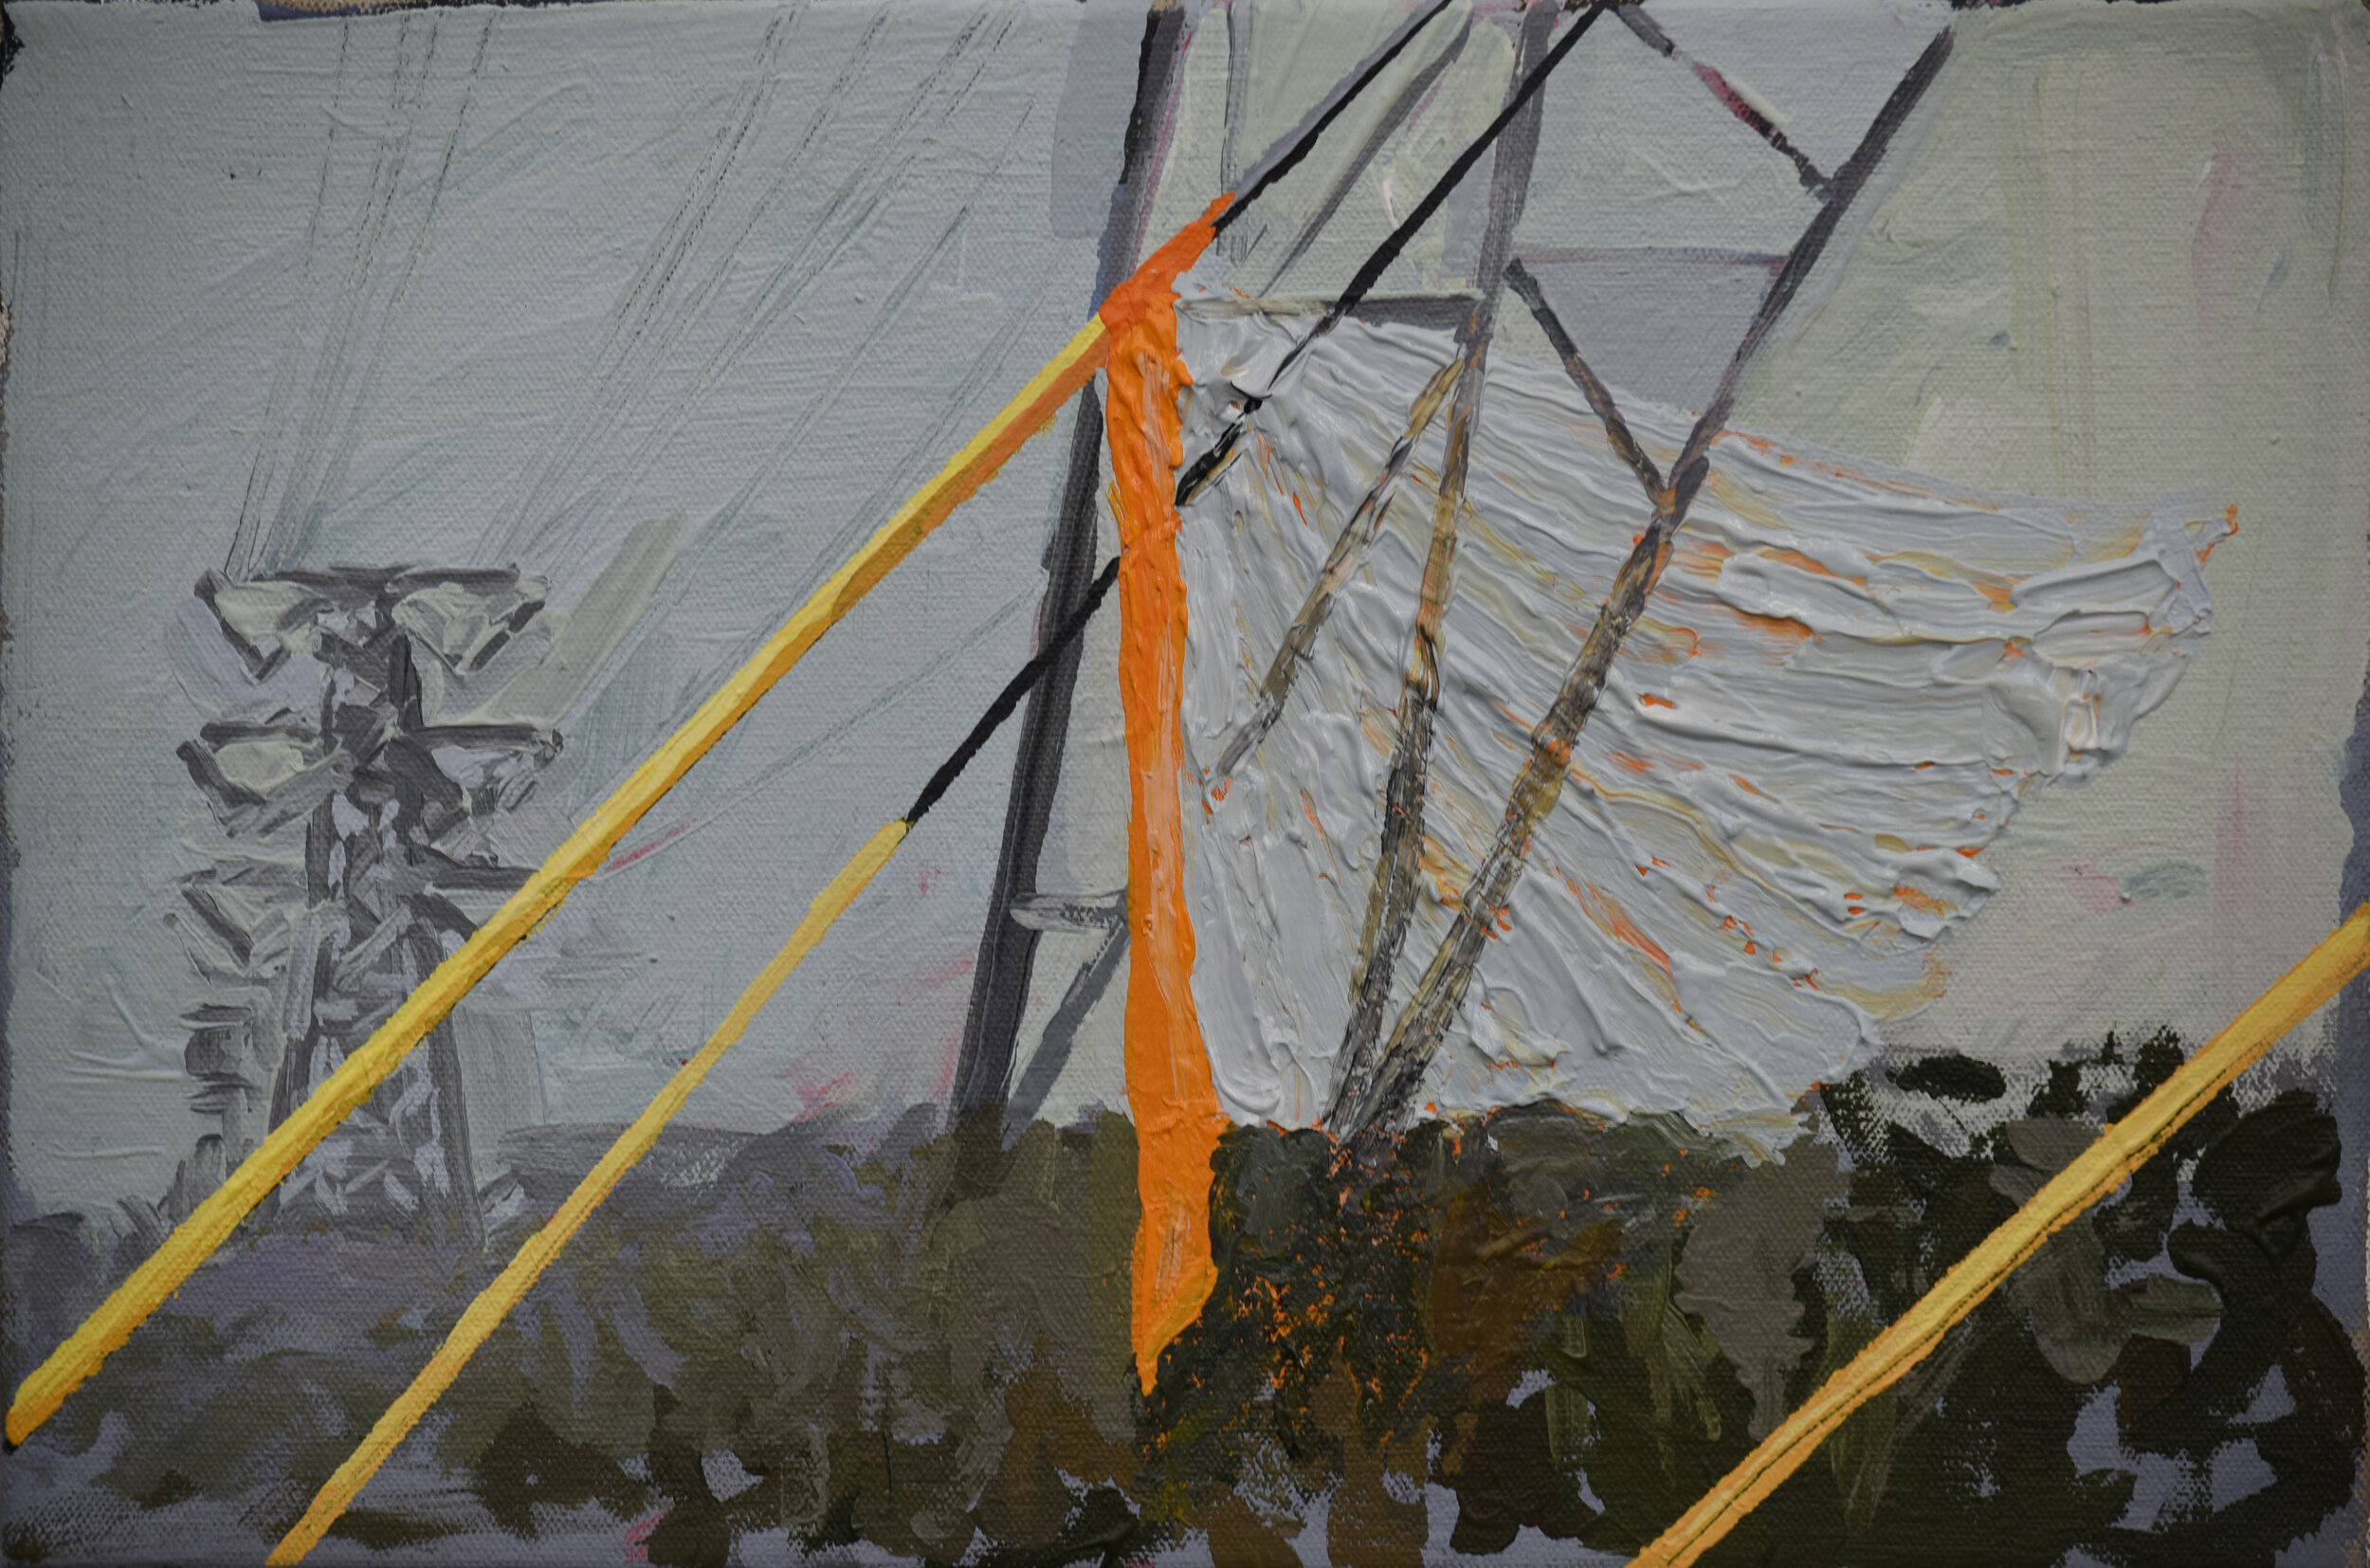  Survey Tape on Power Lines, acrylic on canvas, 10 x 15 inches, 2020 